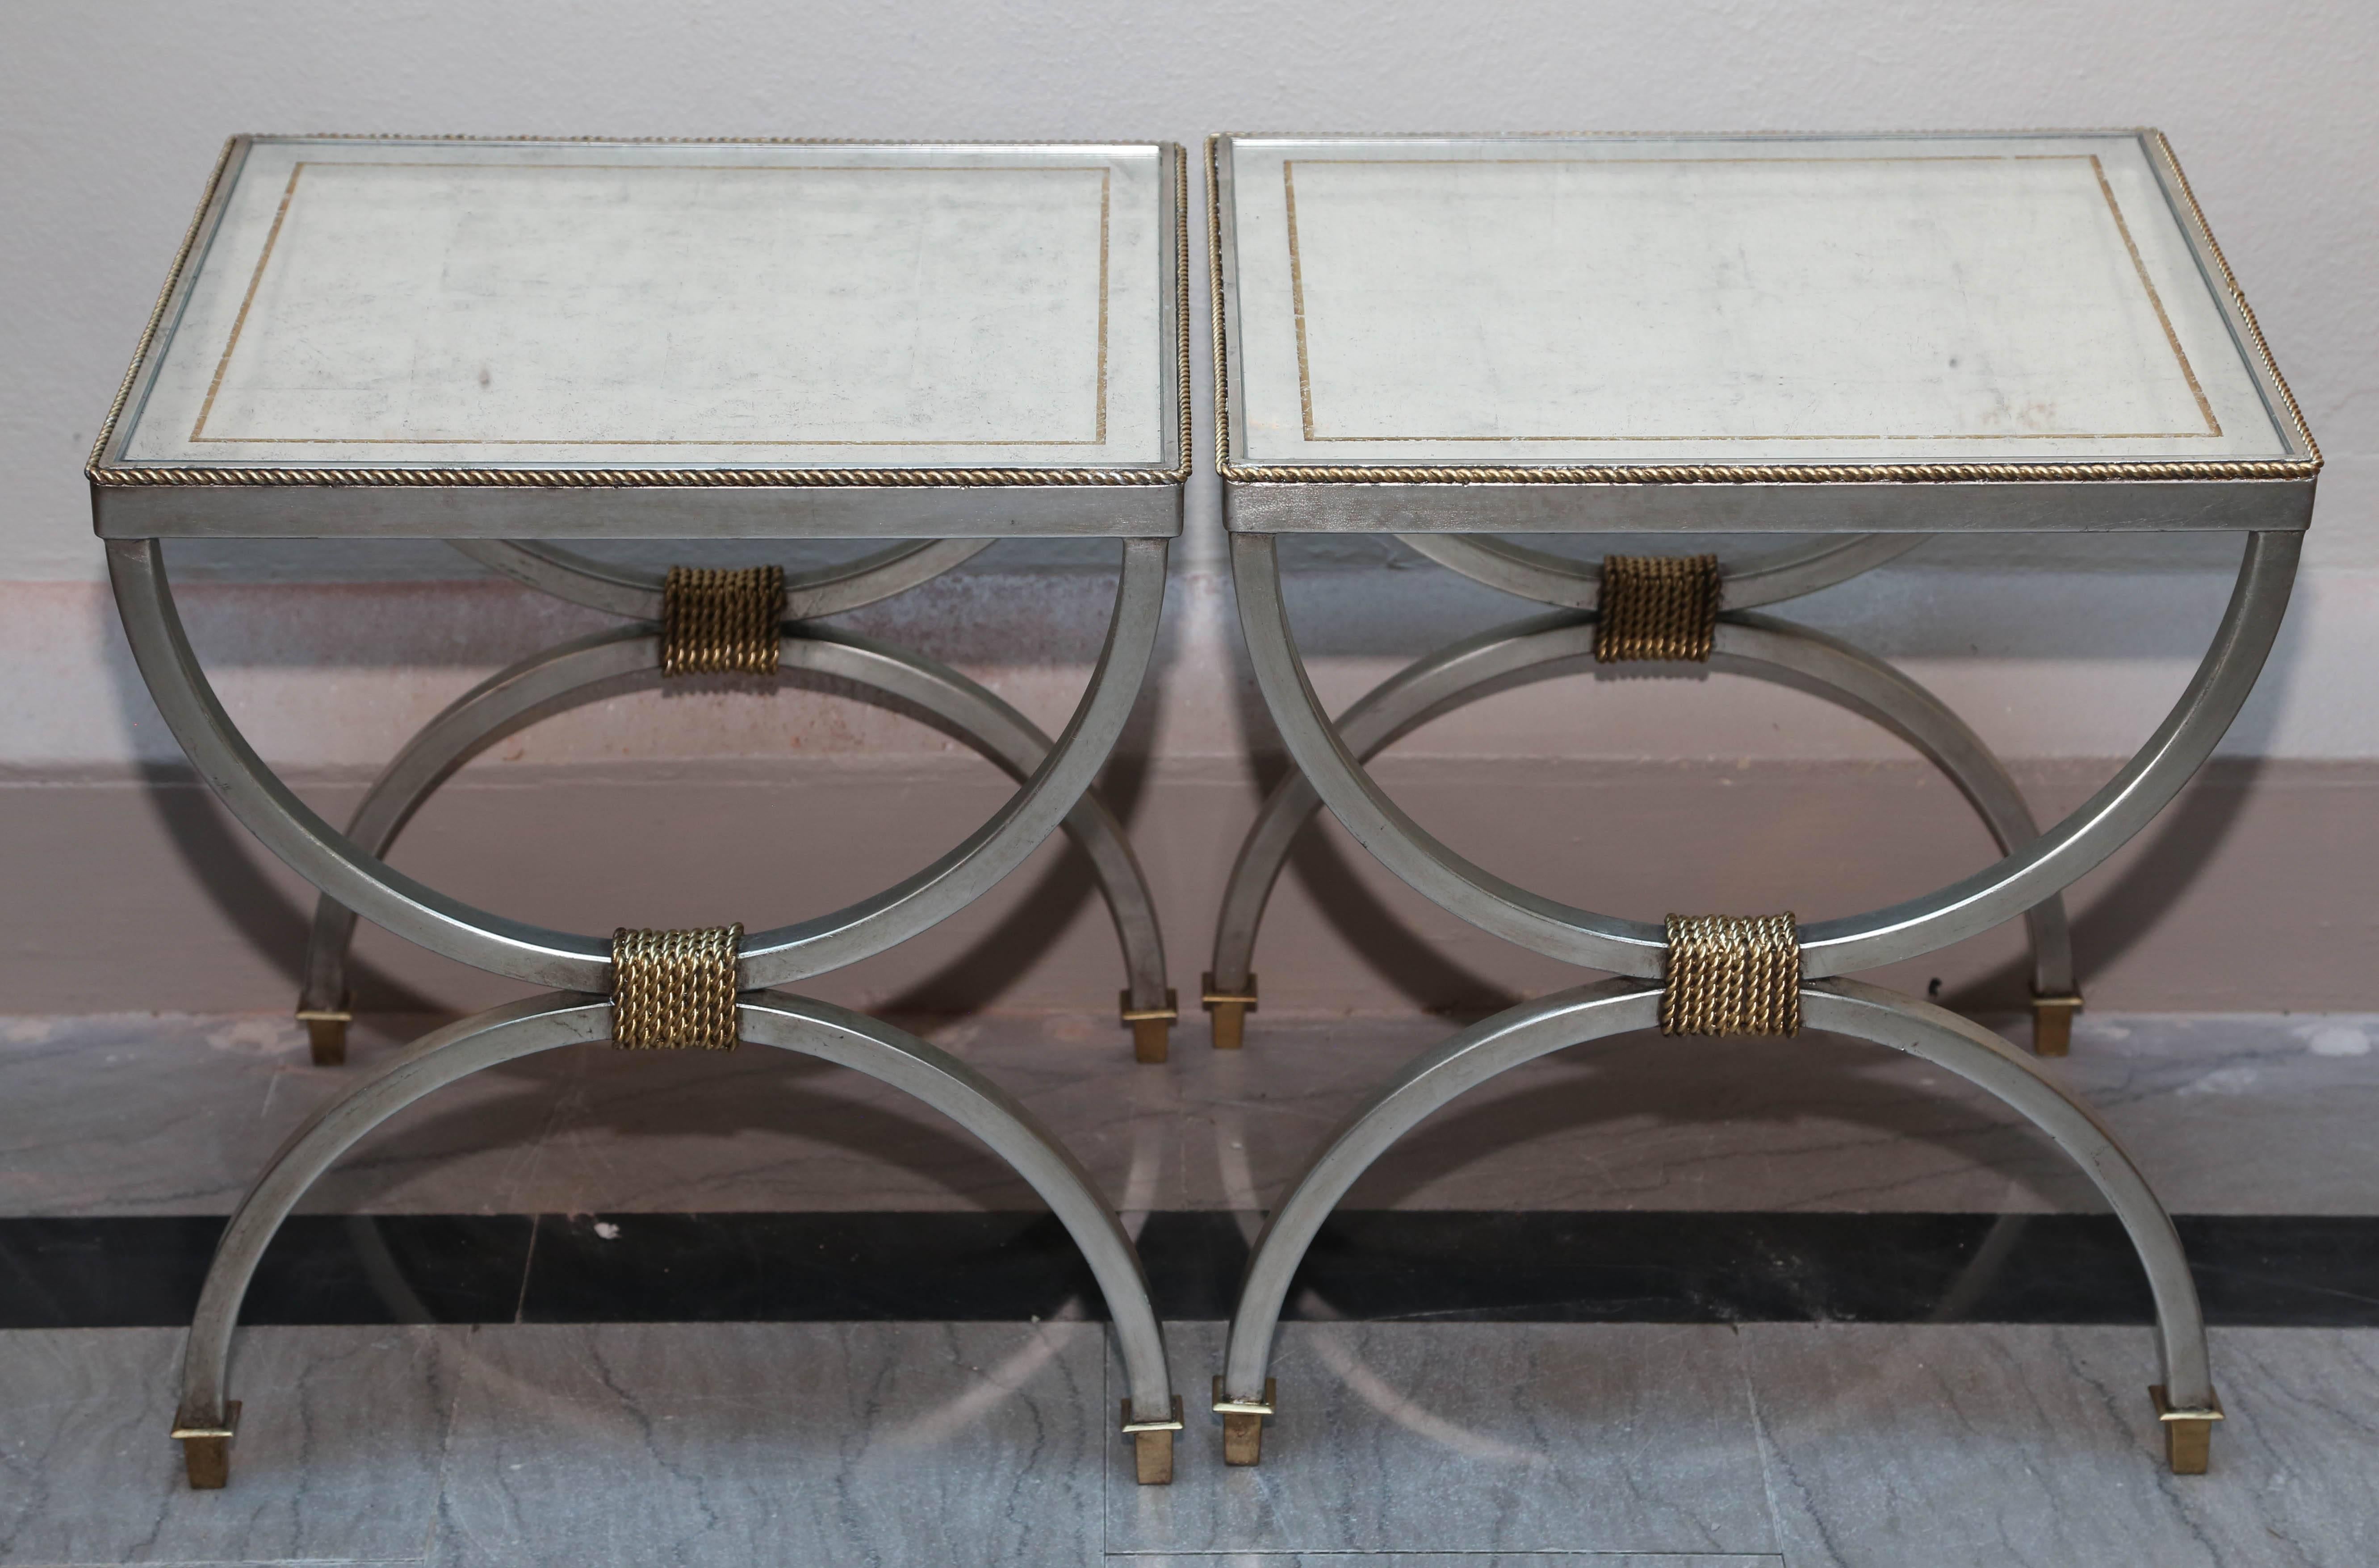 Fitted with silver leafed and "mirrored" tops, original Century designer pieces. A stunning pair.